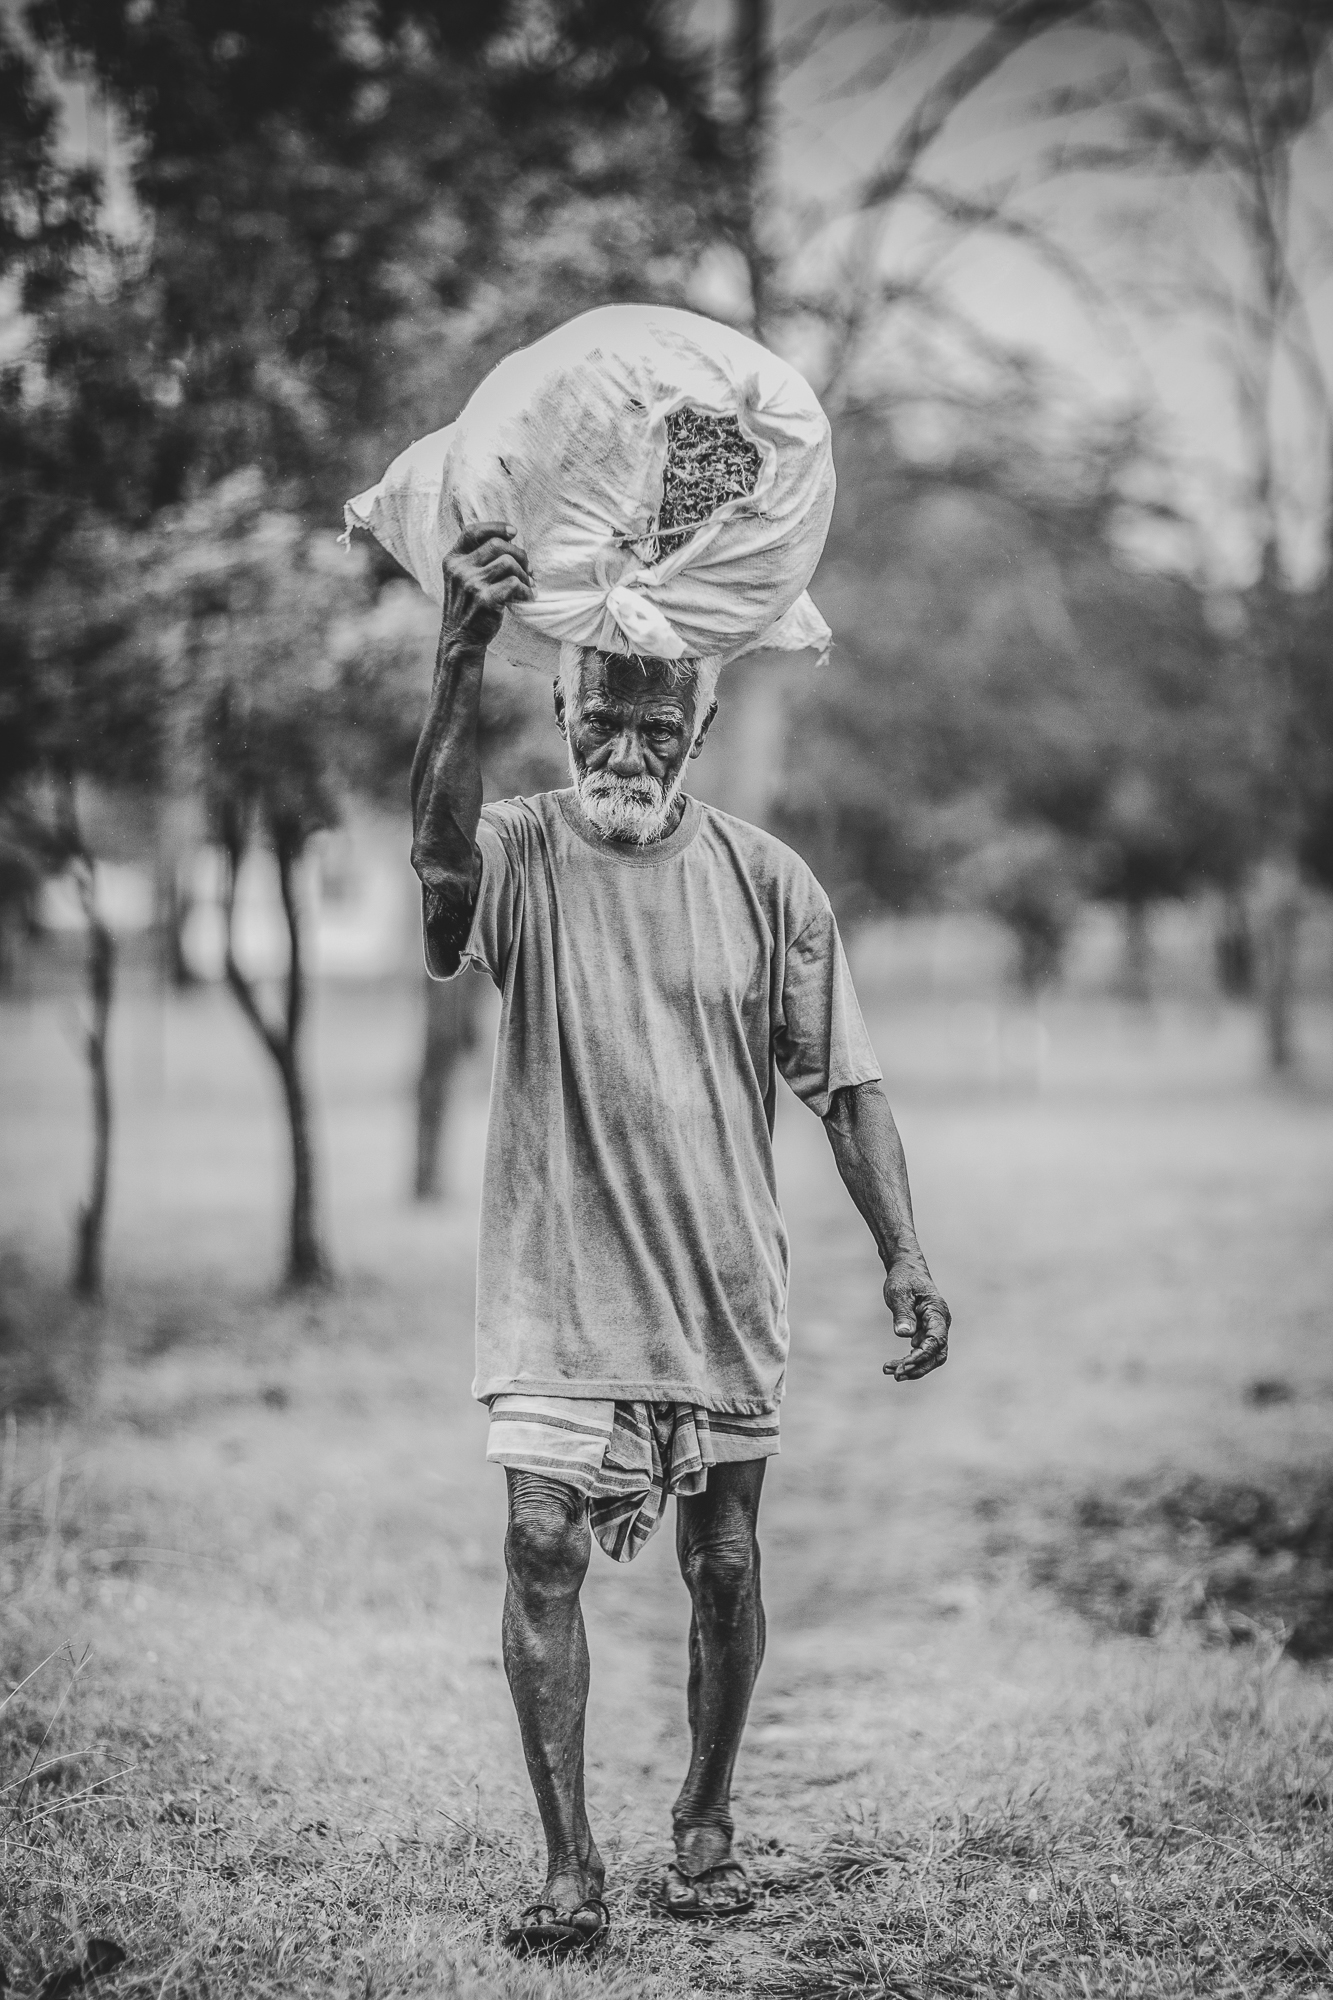 Sri Lankan Man carrying a sack in black and white